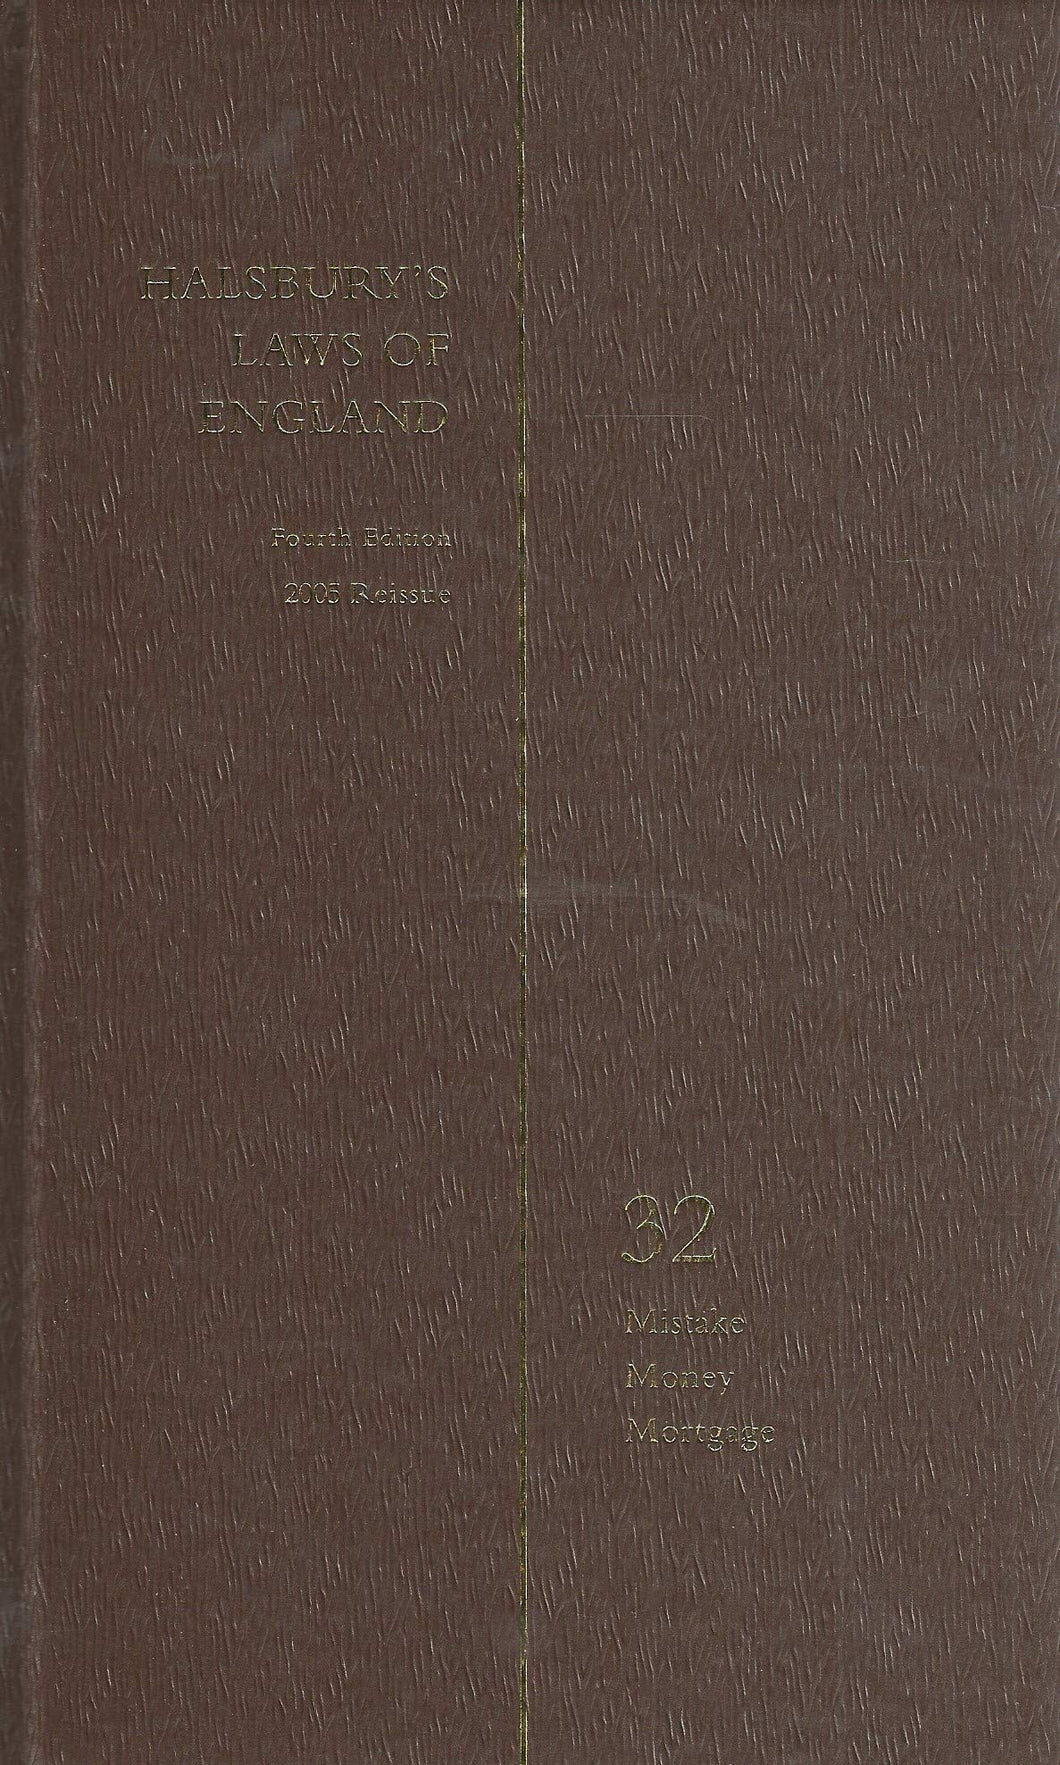 Halsbury's Laws of England, Fourth Edition, 2005 Reissue, Volume 32